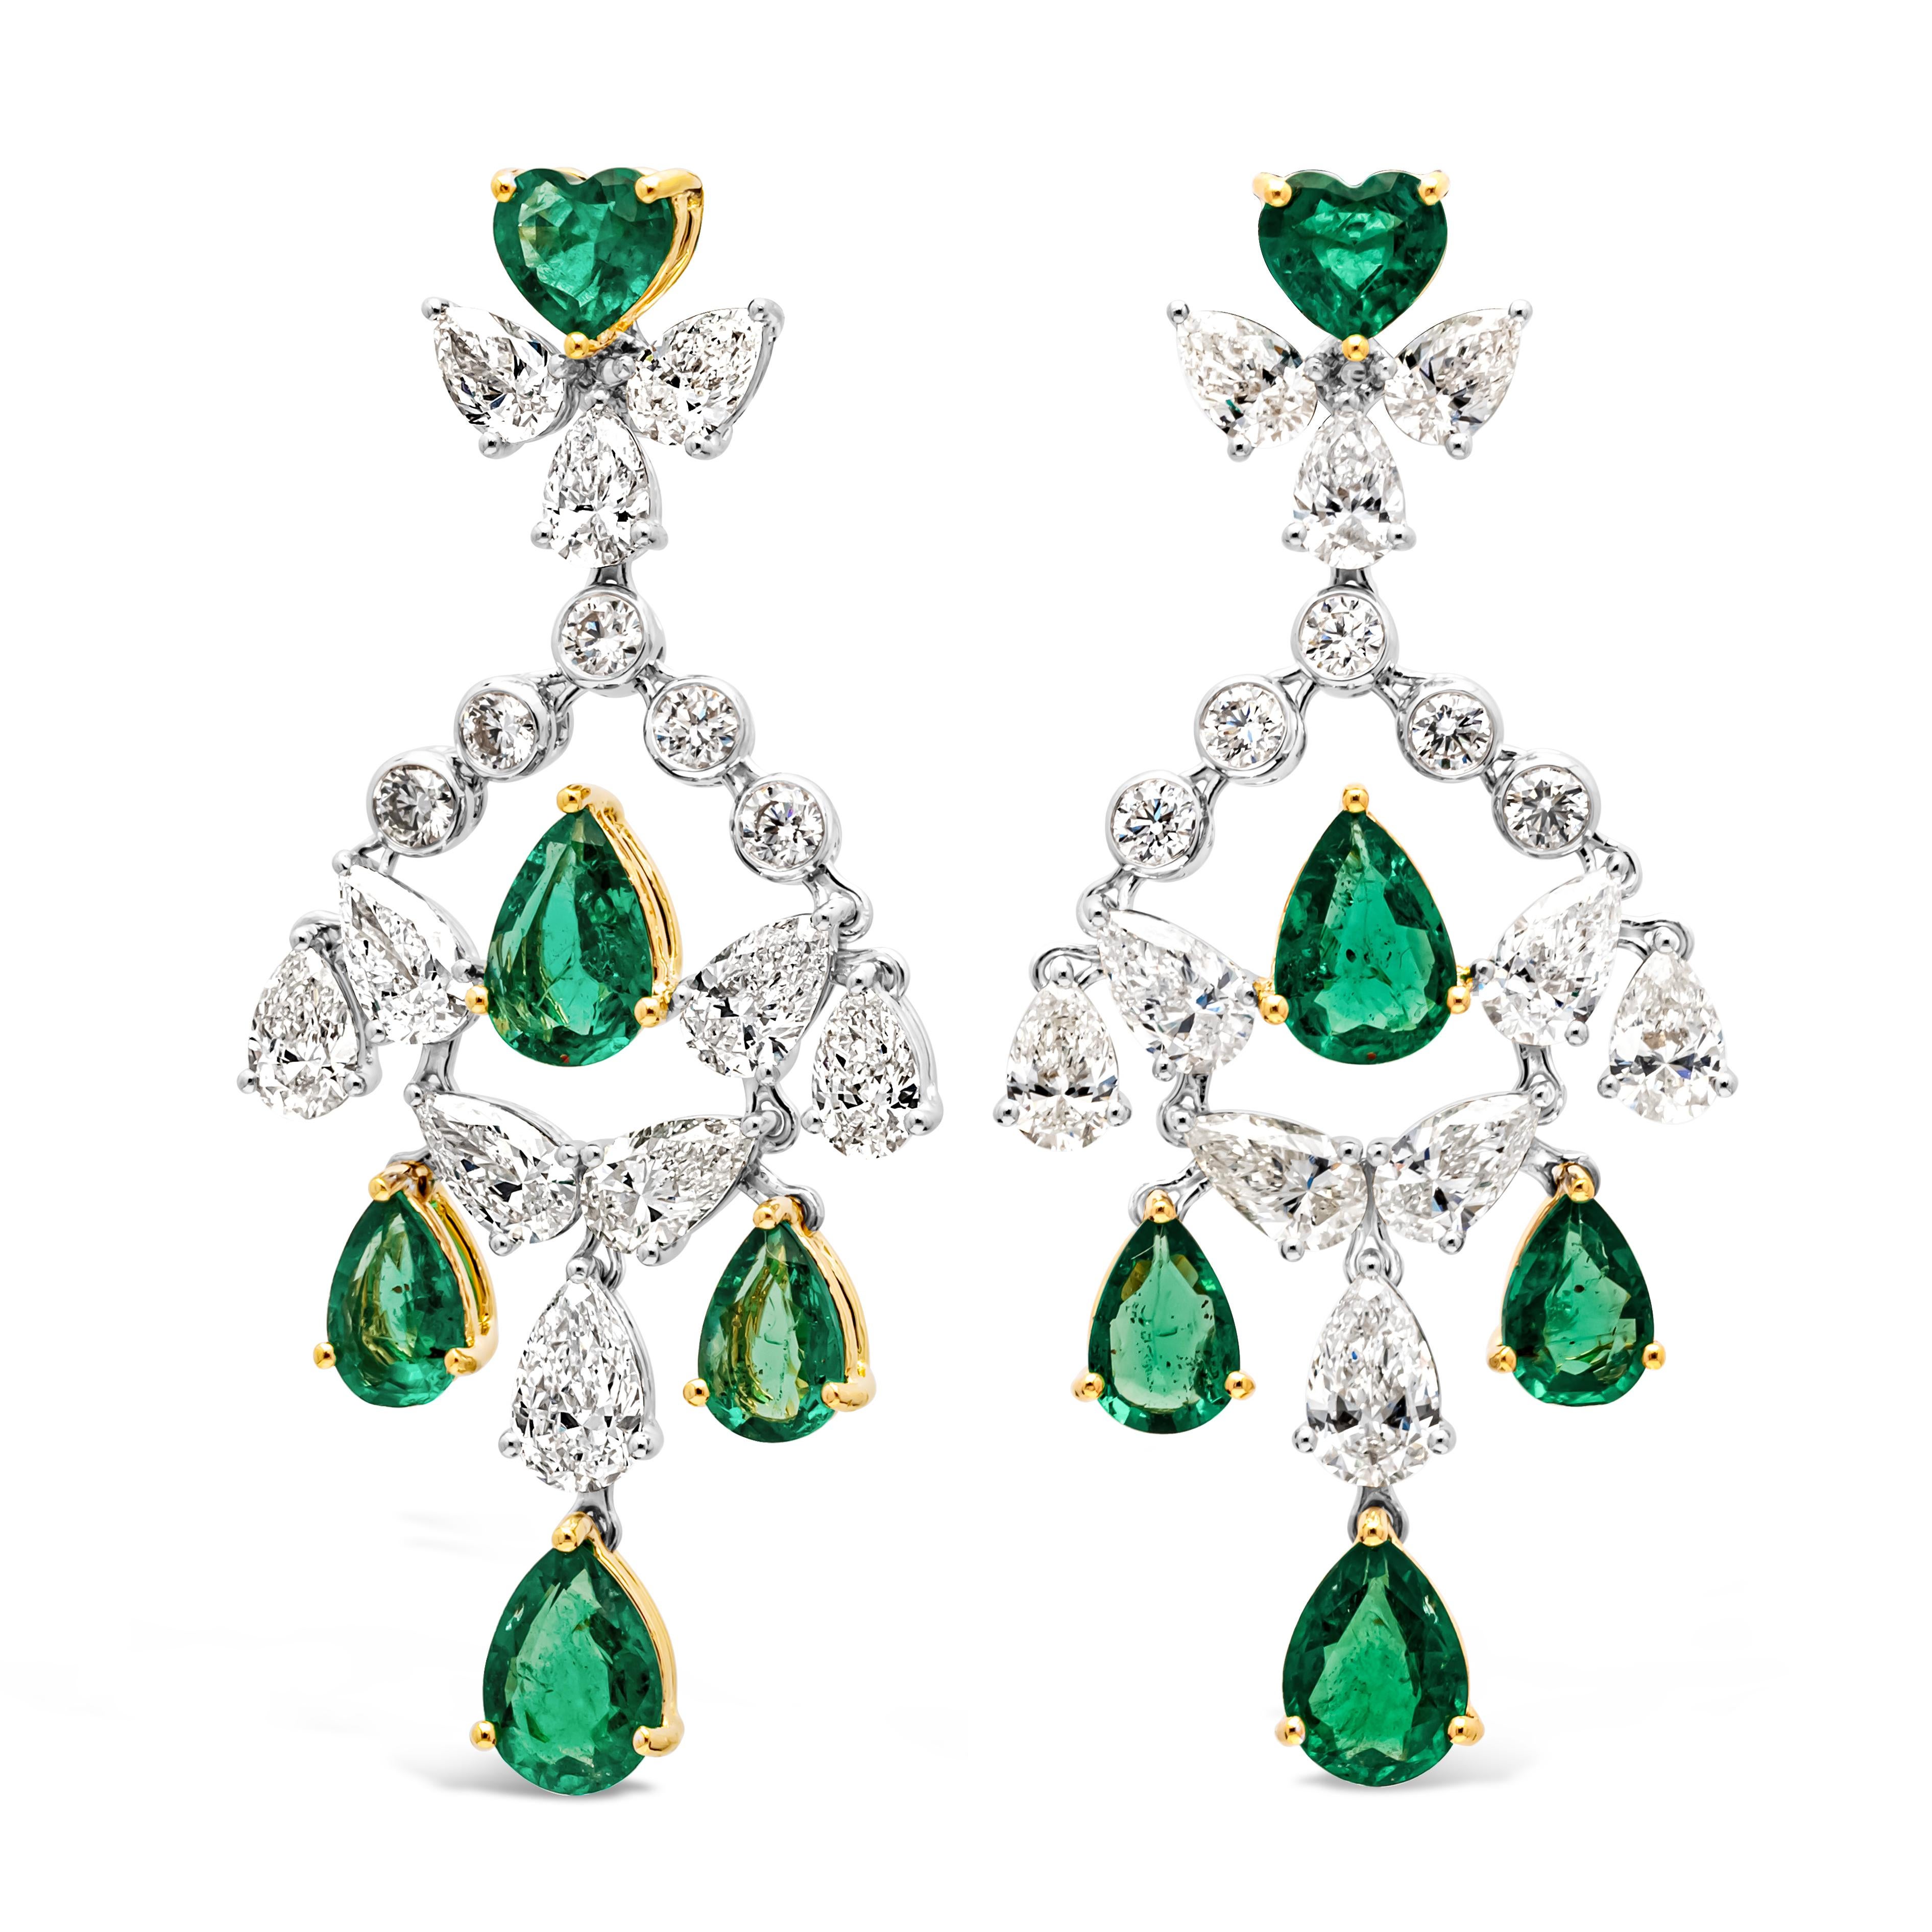 Showcasing a stunning and fashionable pair of chandelier earrings set with mixed cut color-rich green emerald and diamonds in a beautiful chandelier 'shoulder duster' design. Green emeralds weigh 4.23 carats total and diamonds weigh 4.33 carats